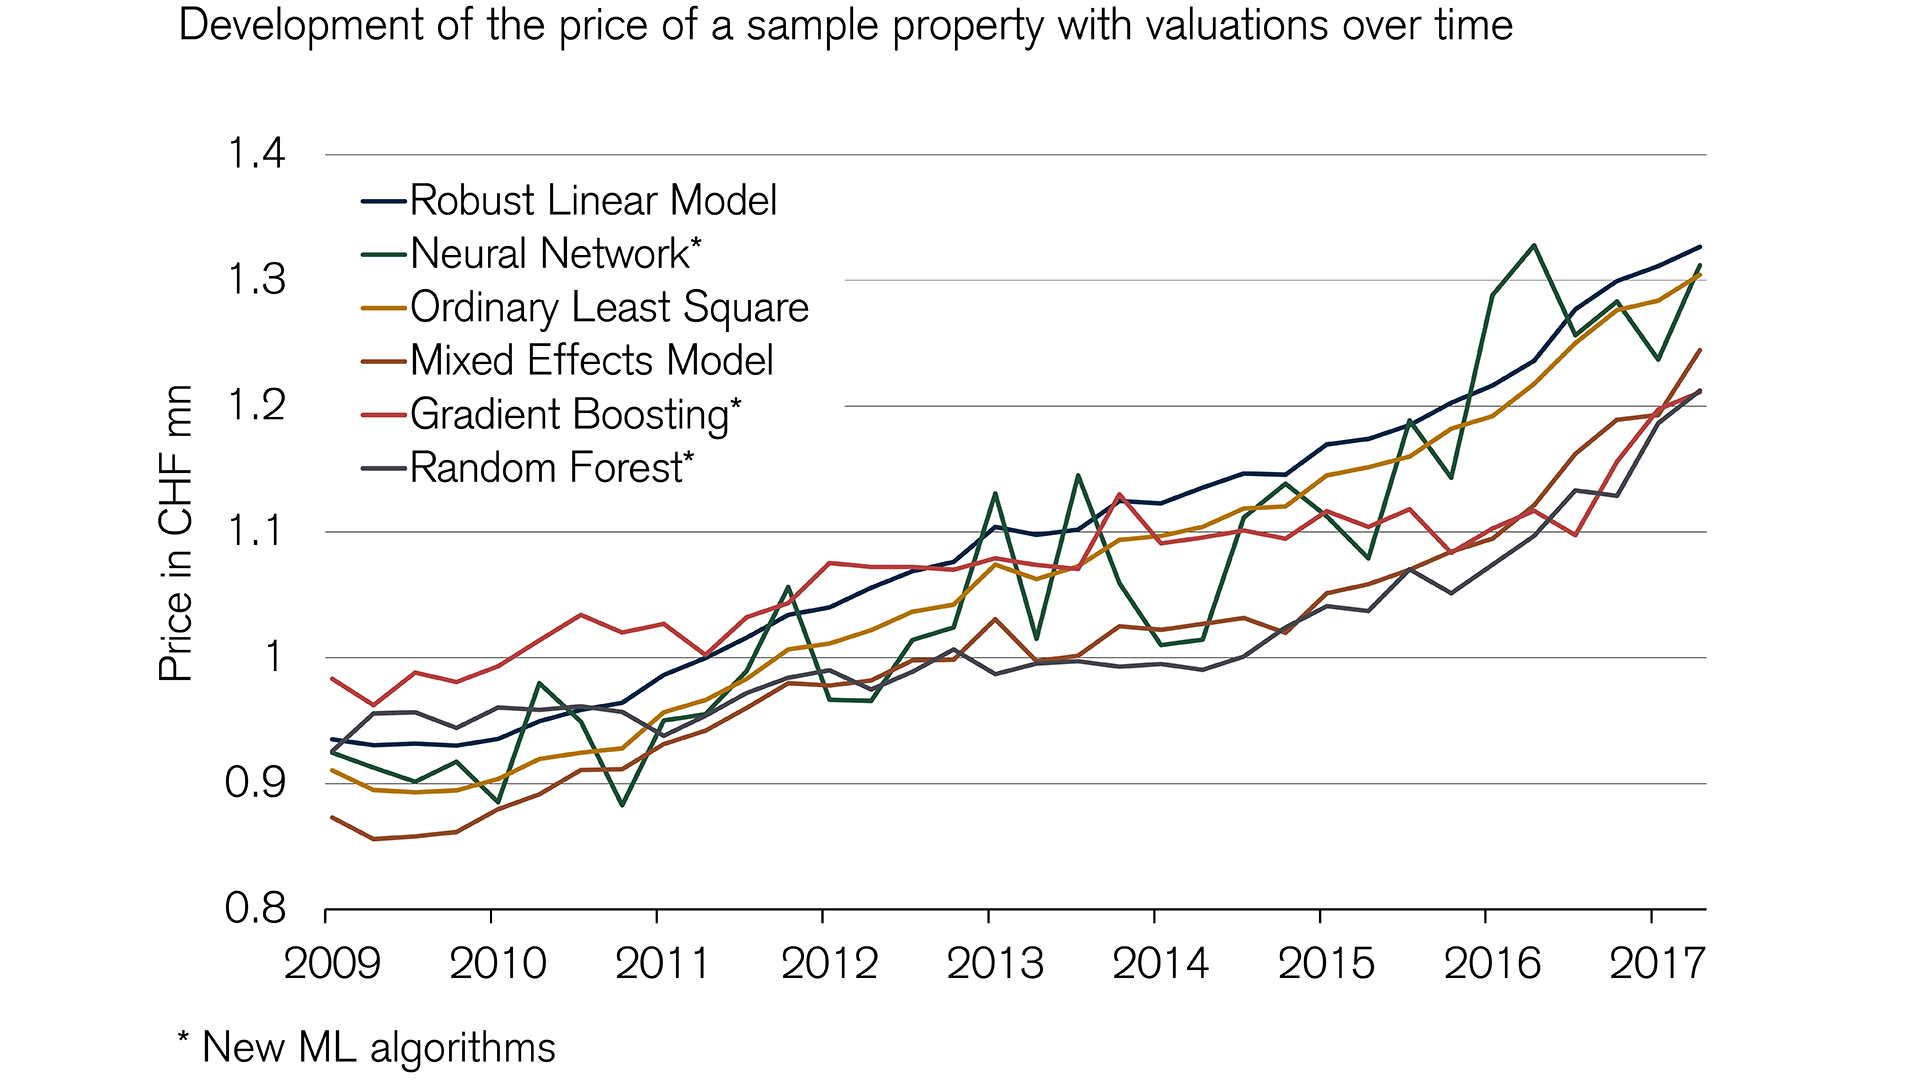 Traditional models show less volatility in real estate valuation